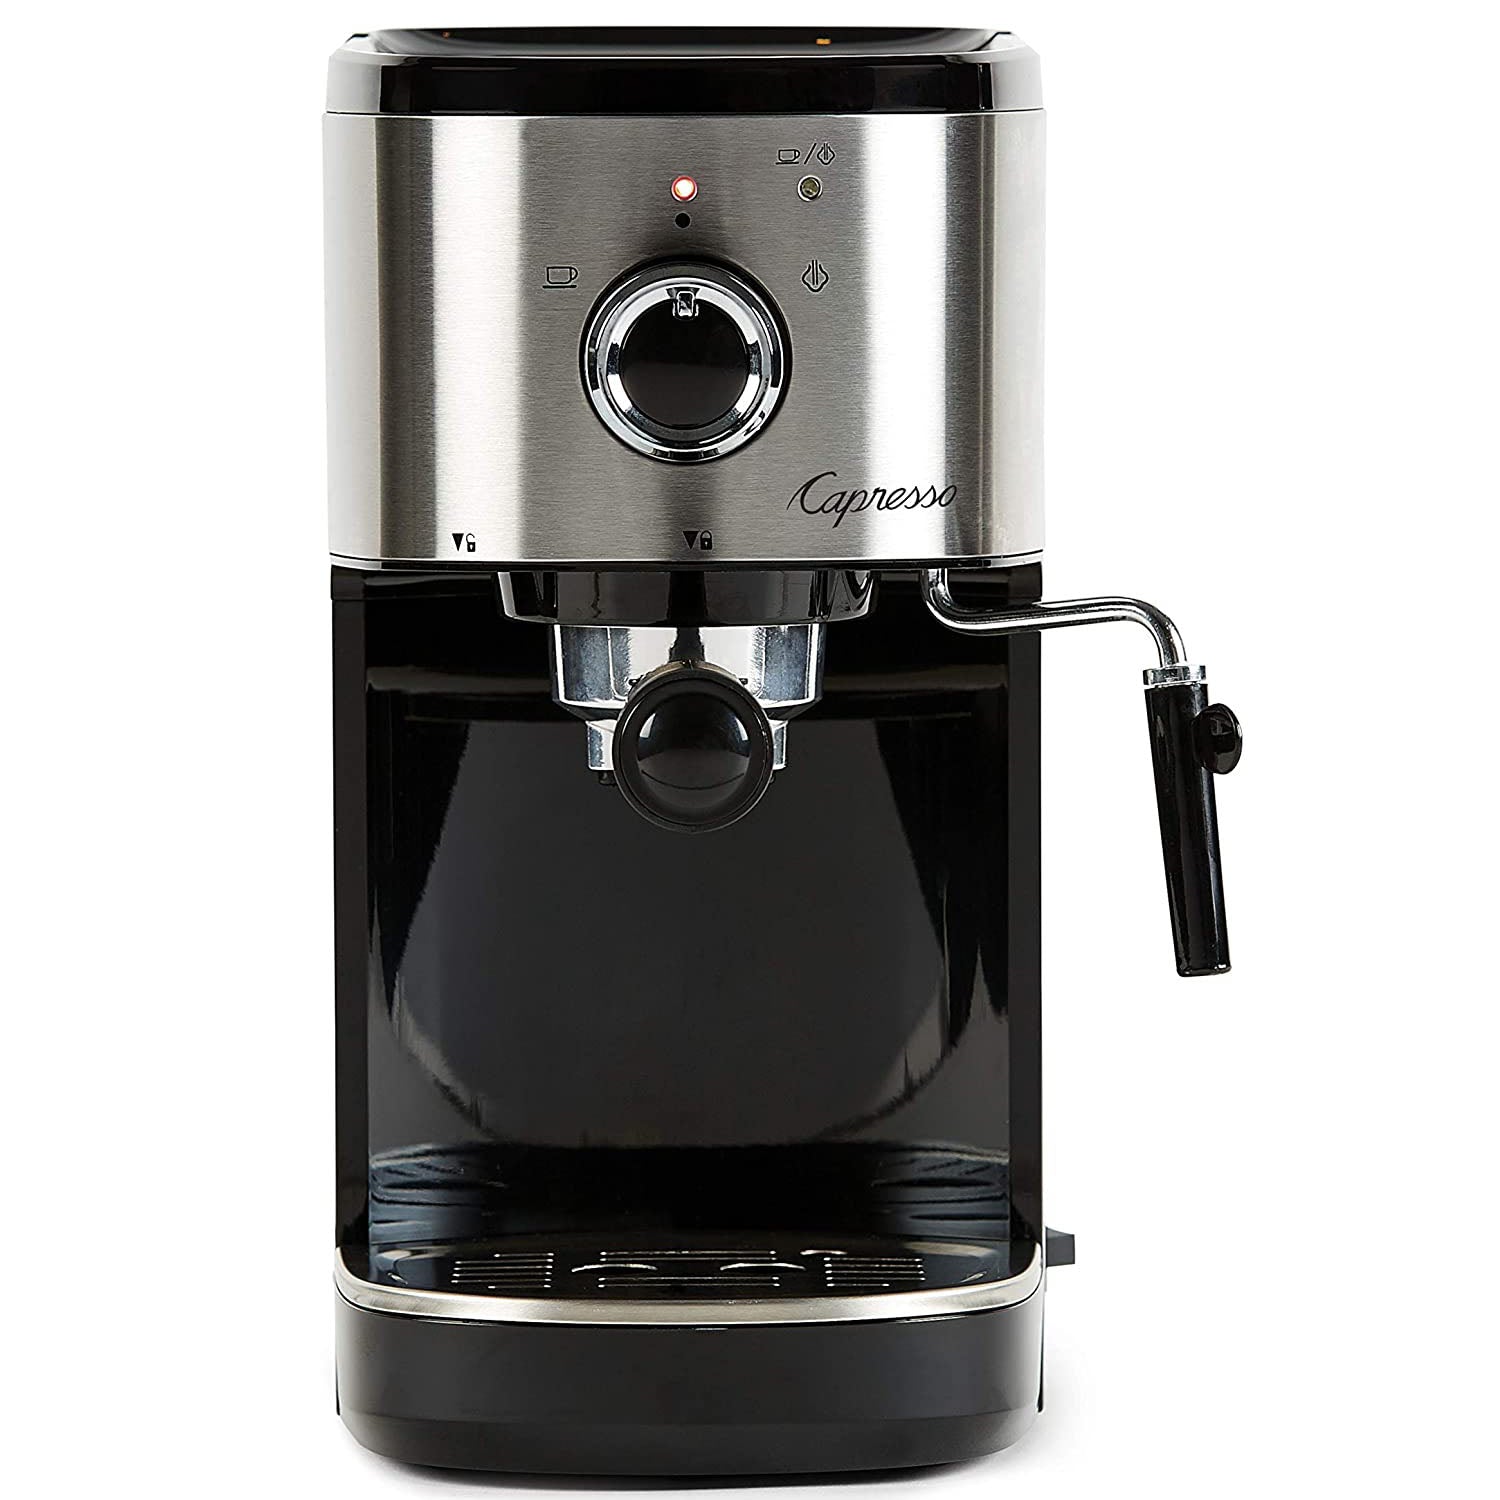 Capresso Stainless Steel 12 Cup Electric Coffee Percolator 